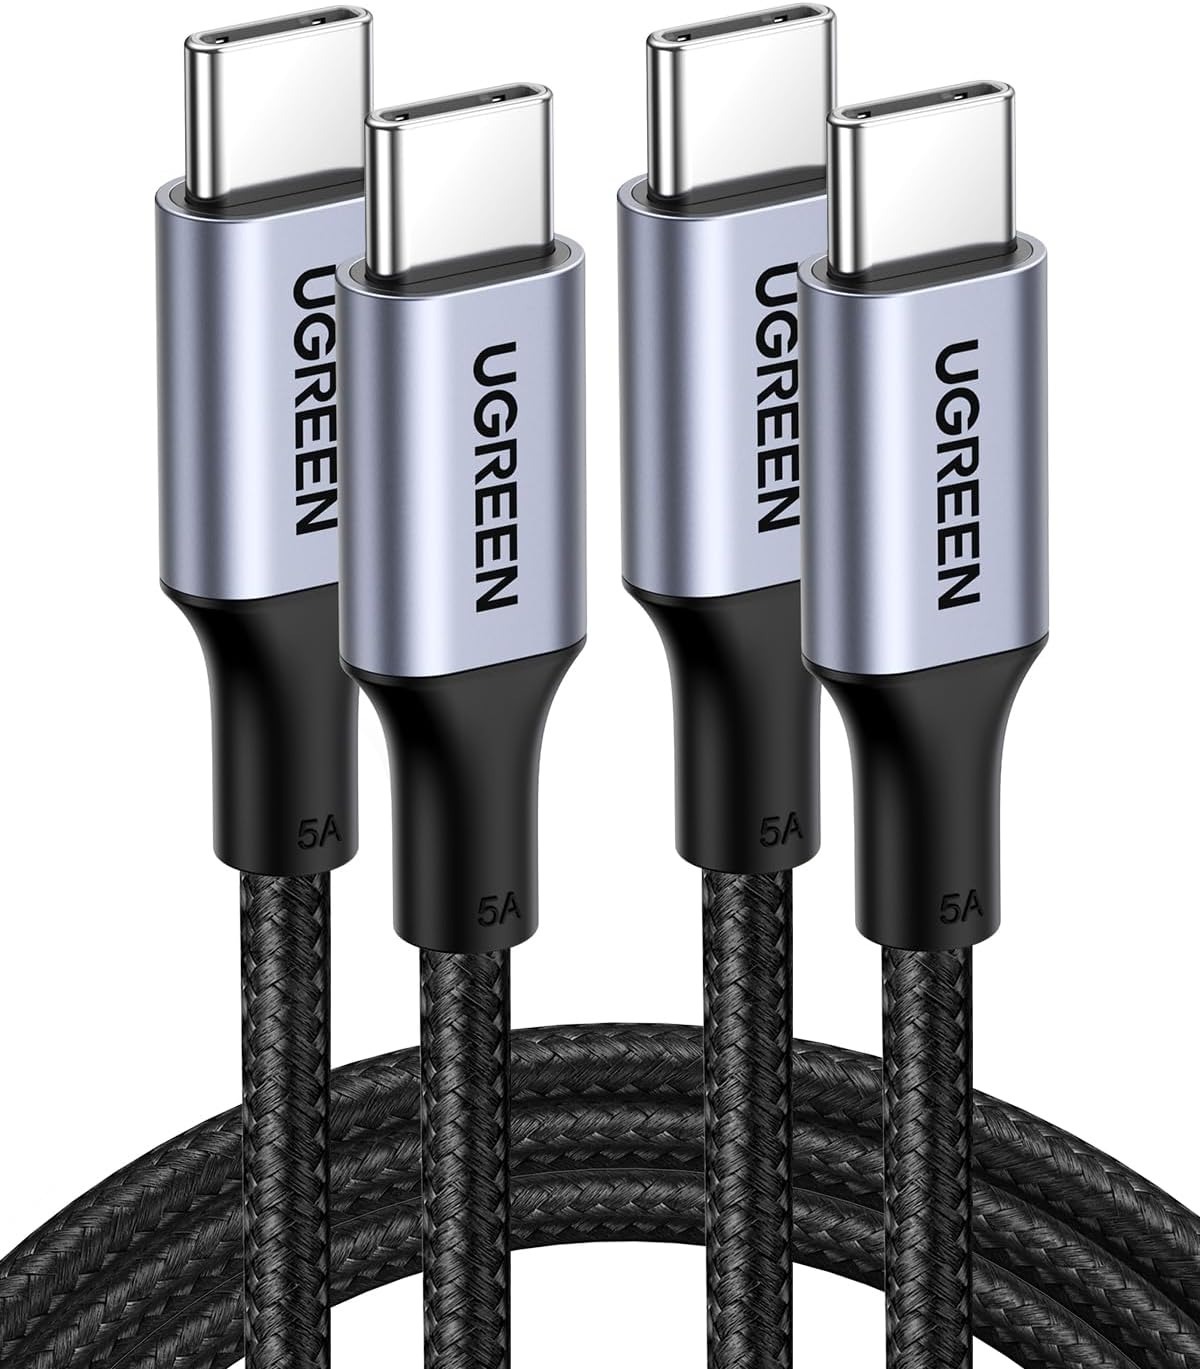 2-Pack 3.3' UGREEN USB C Charger Cable 60W $9.49 & More + Free Shipping w/ Prime or orders $35+